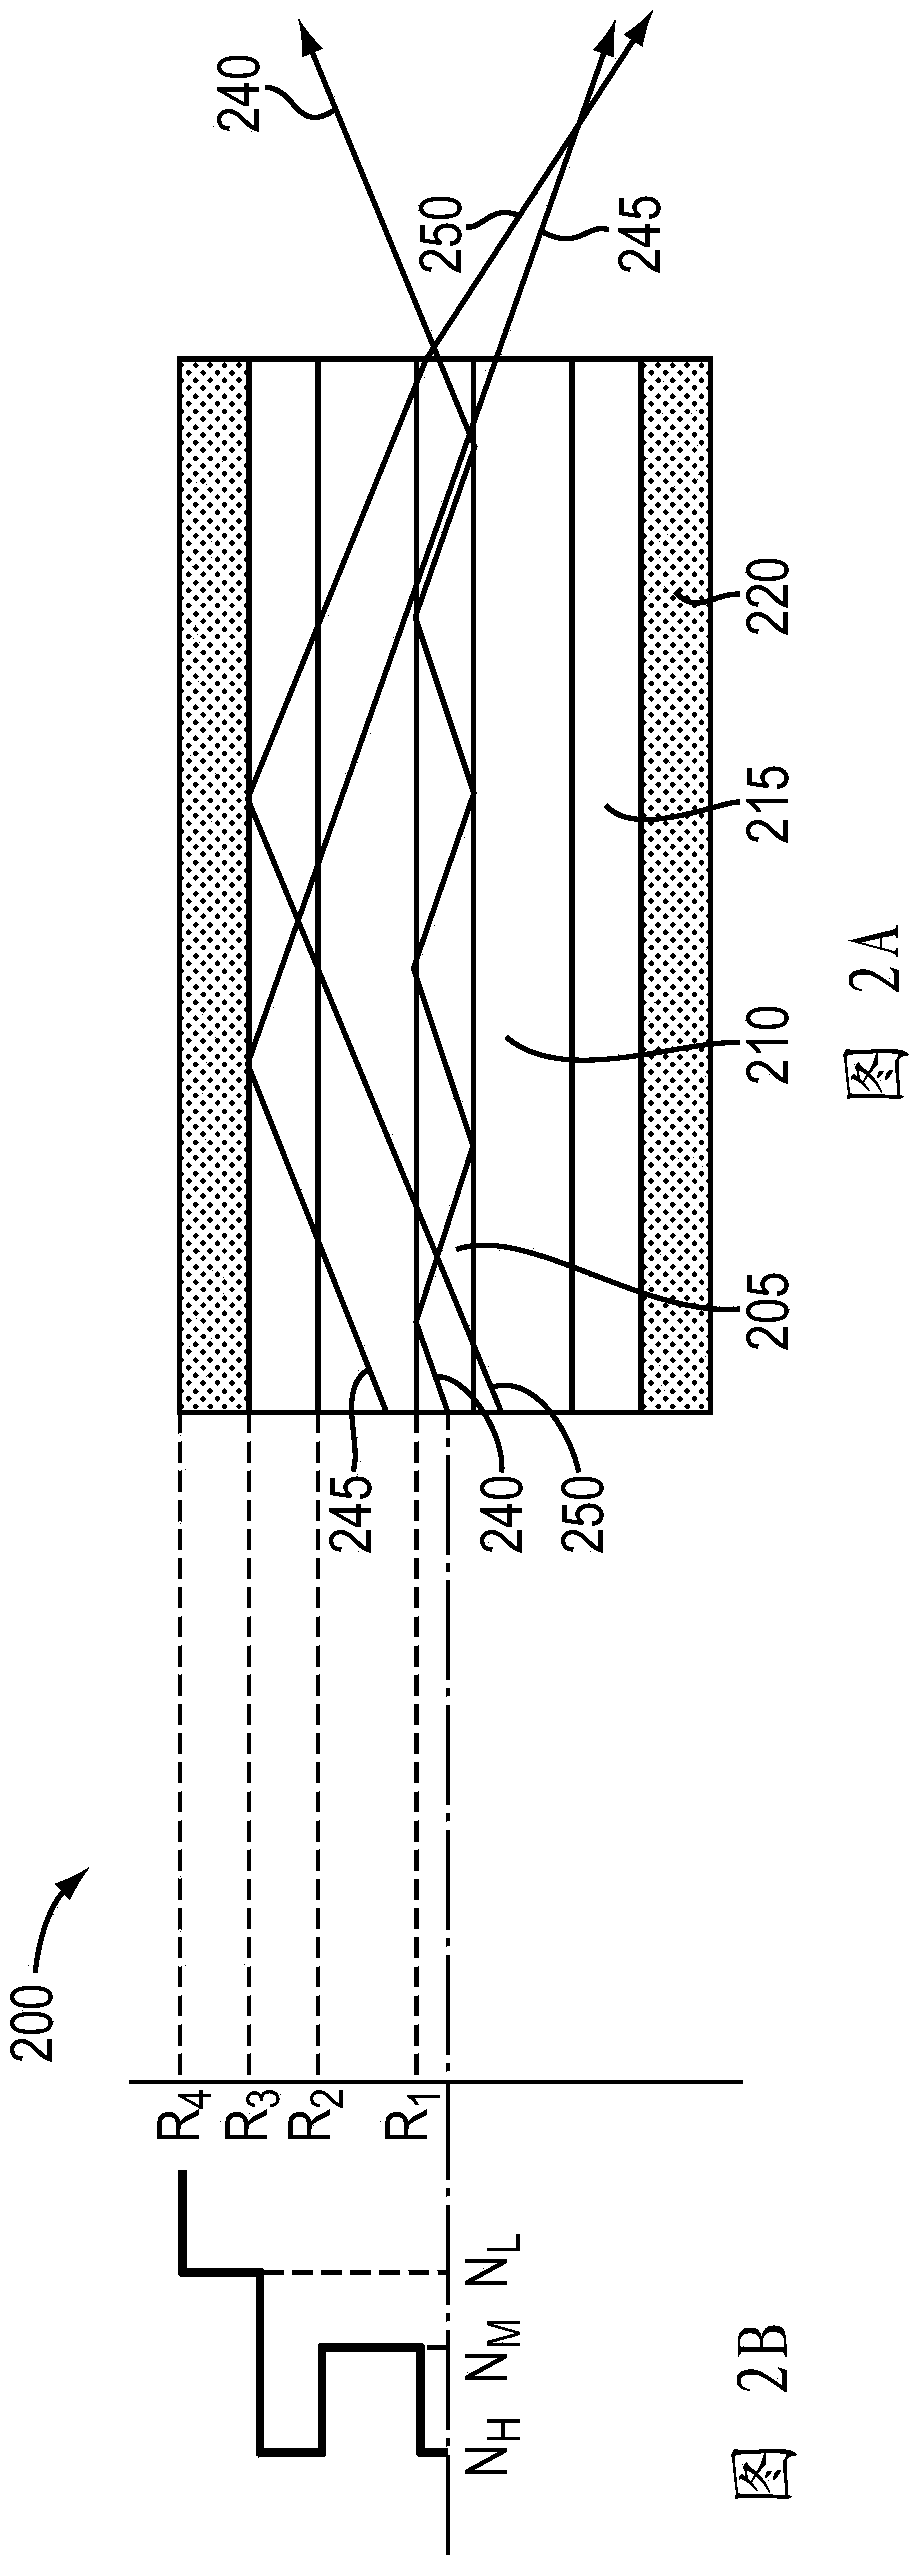 Optical fiber structures and methods for varying laser beam profile